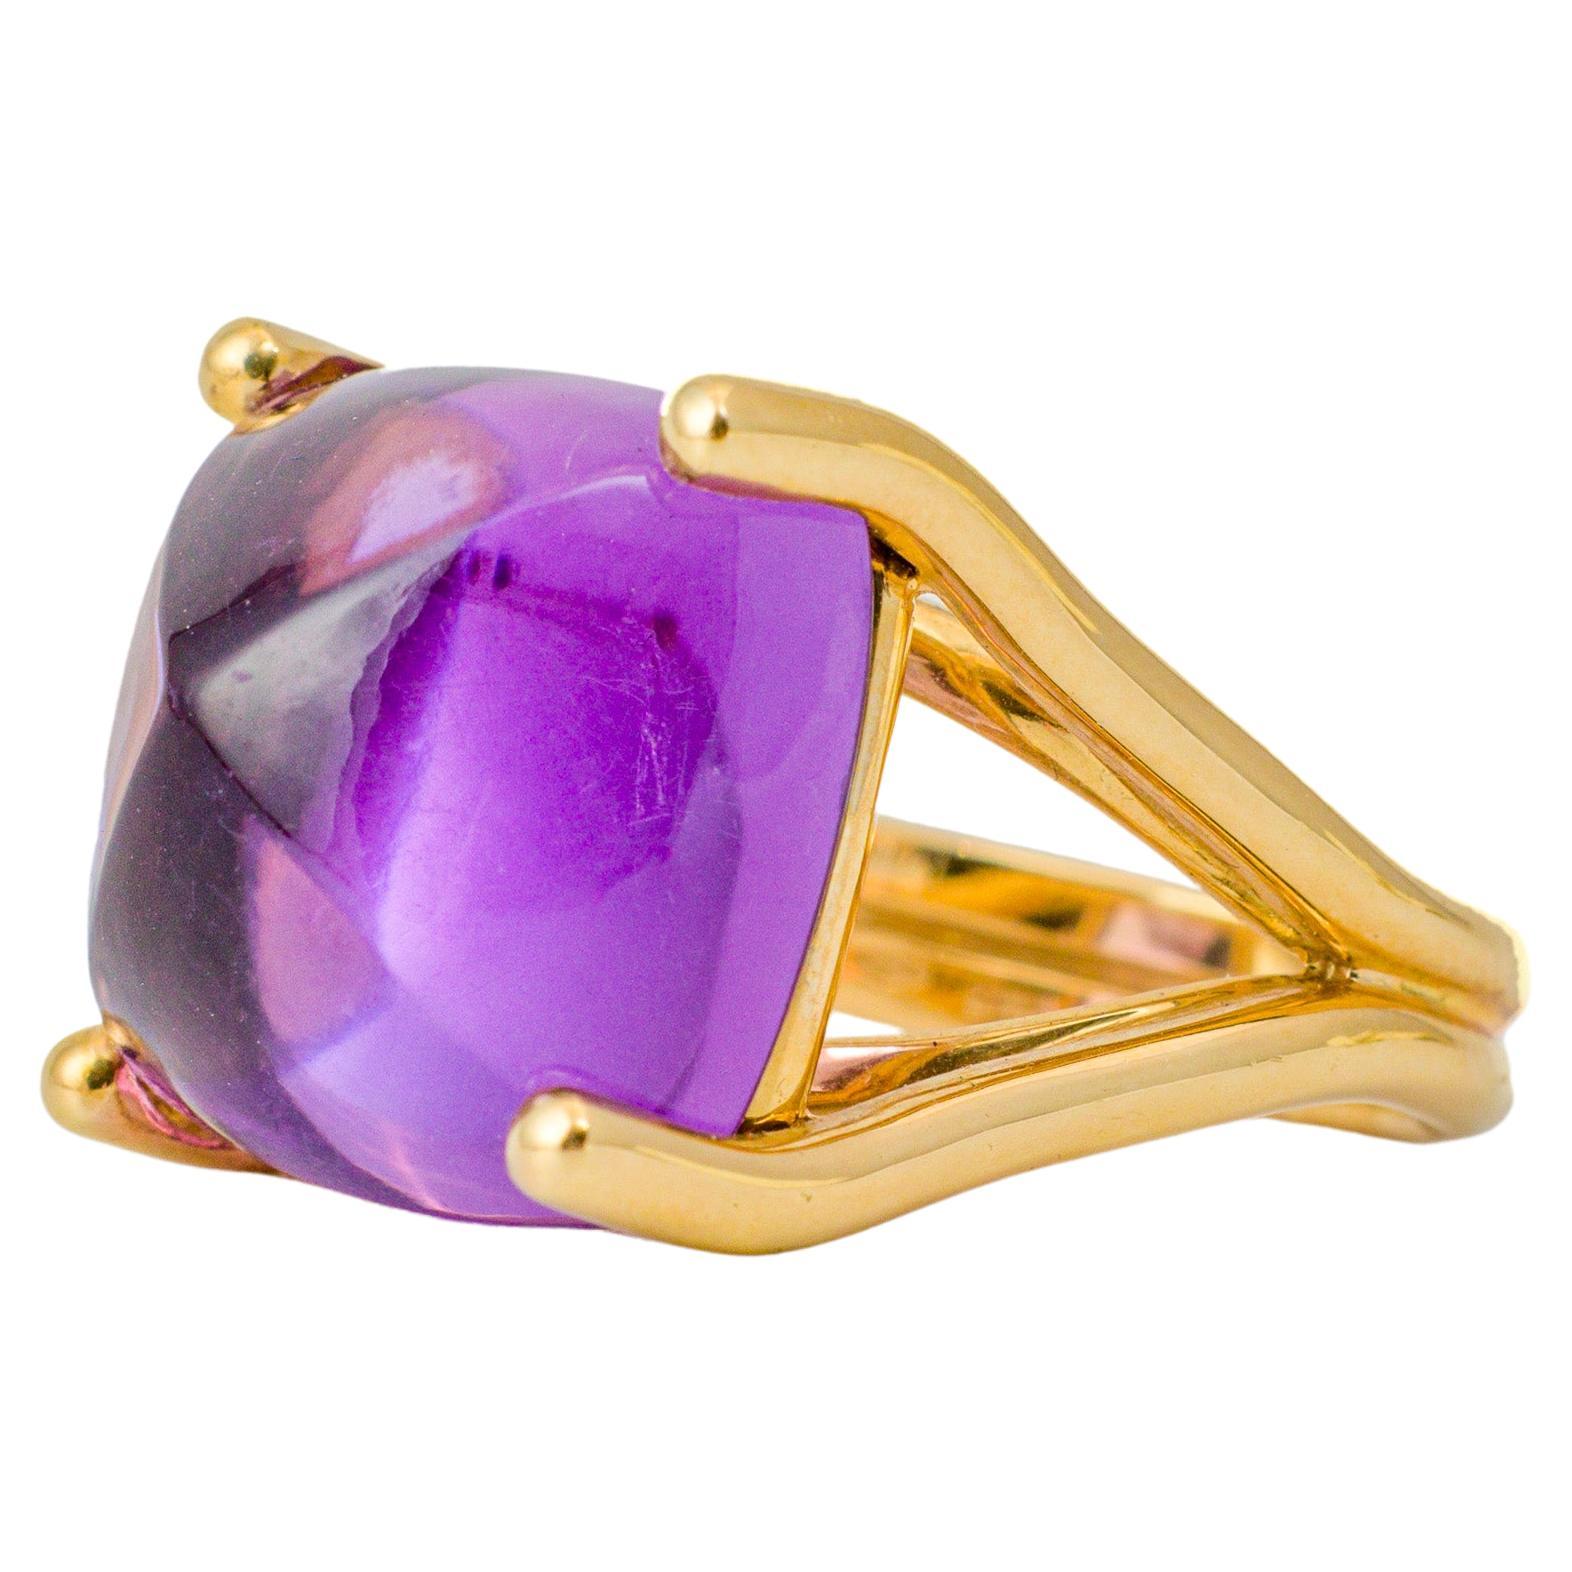 "Costis" Stone on Wire Ring with 27.61 carats Sugarloaf Cabochon Amethyst